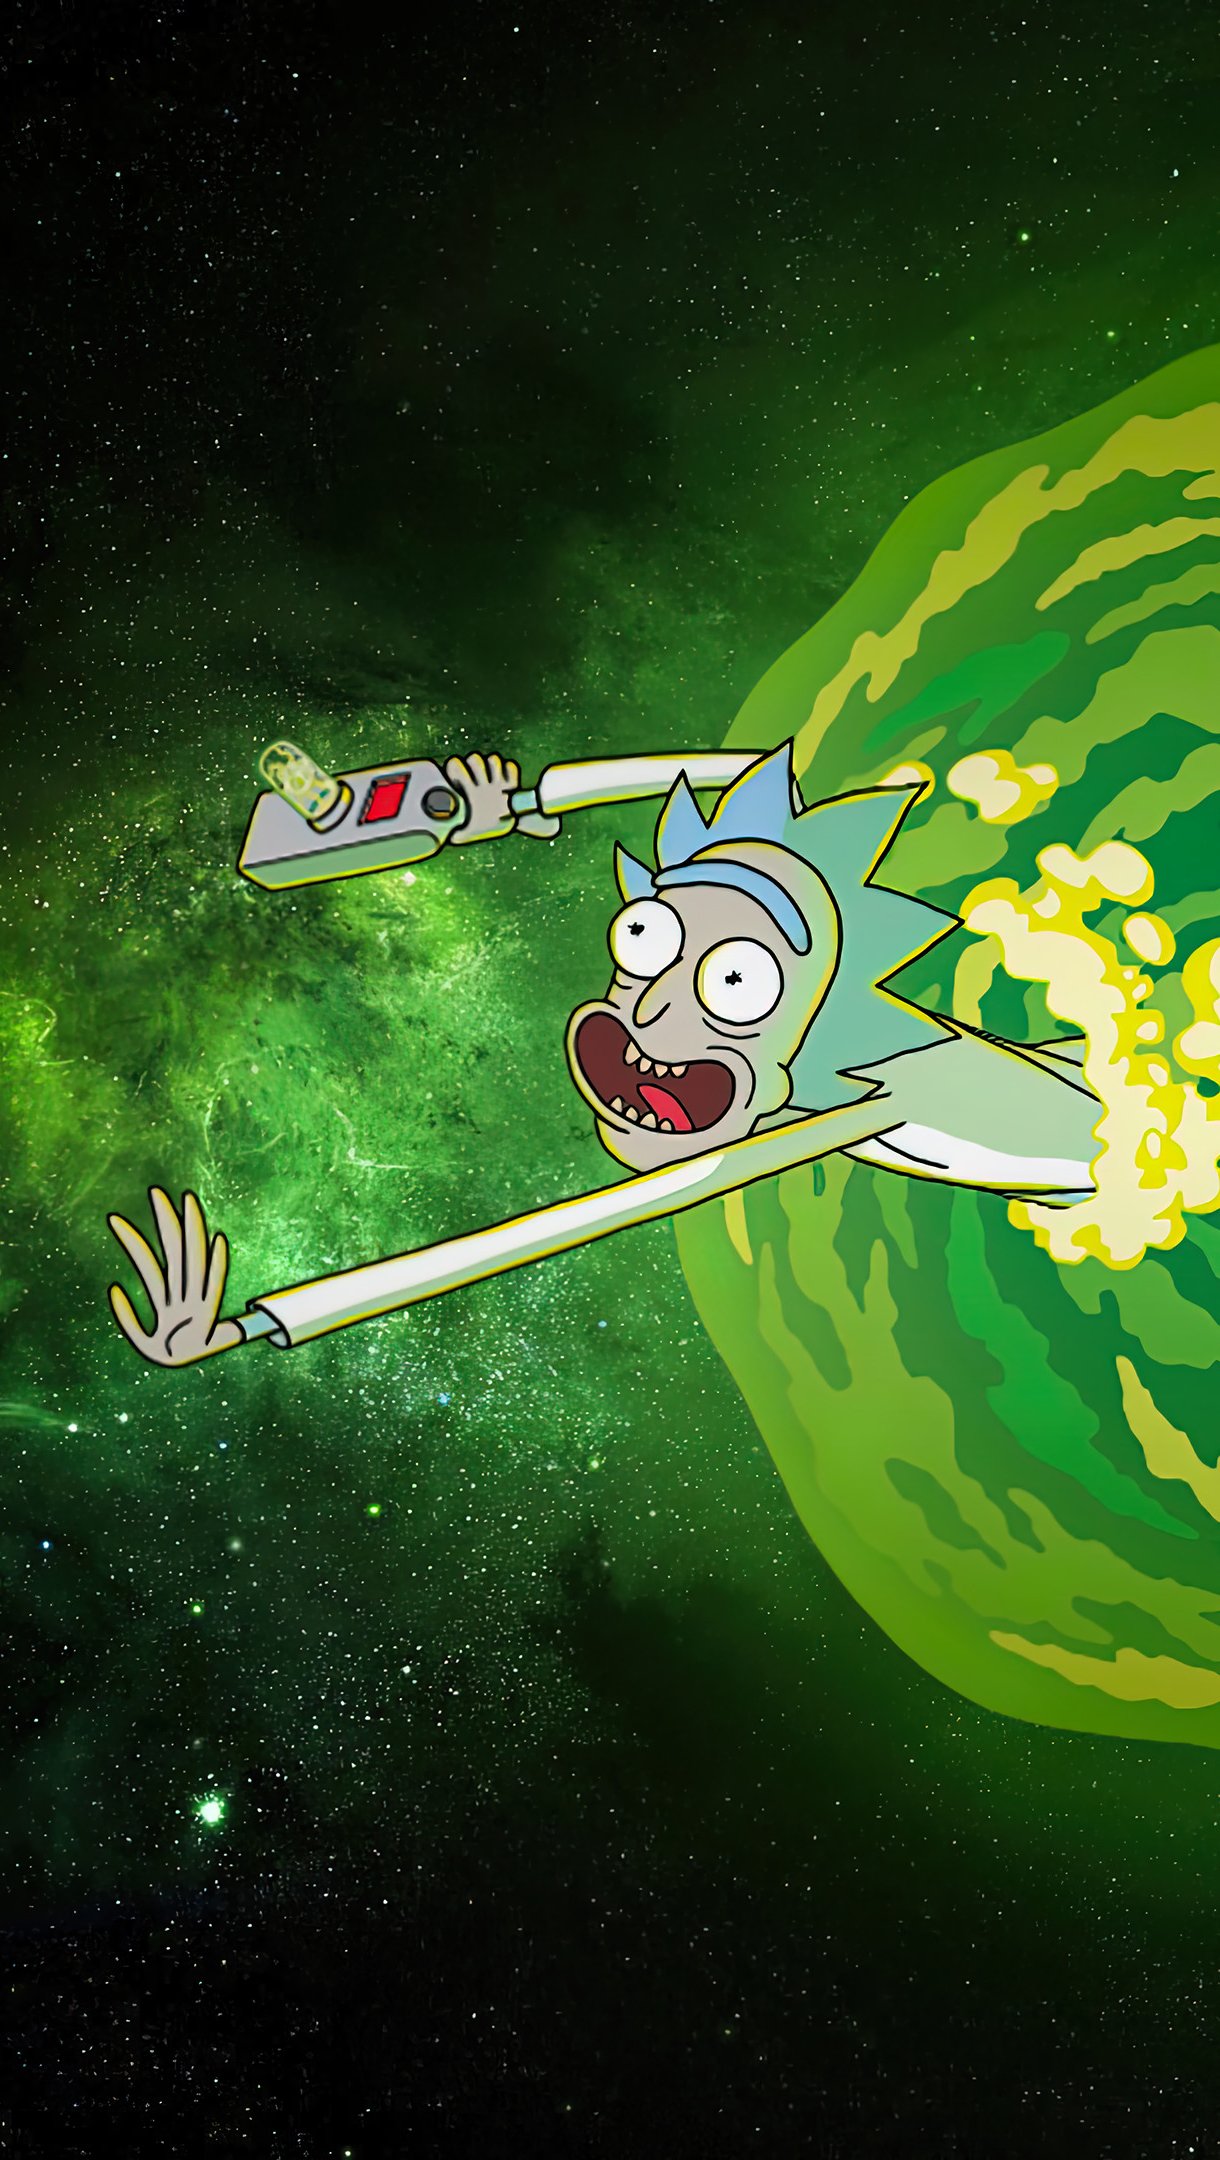 Rick and Morty scaping portal Wallpaper 4k Ultra HD ID:9235